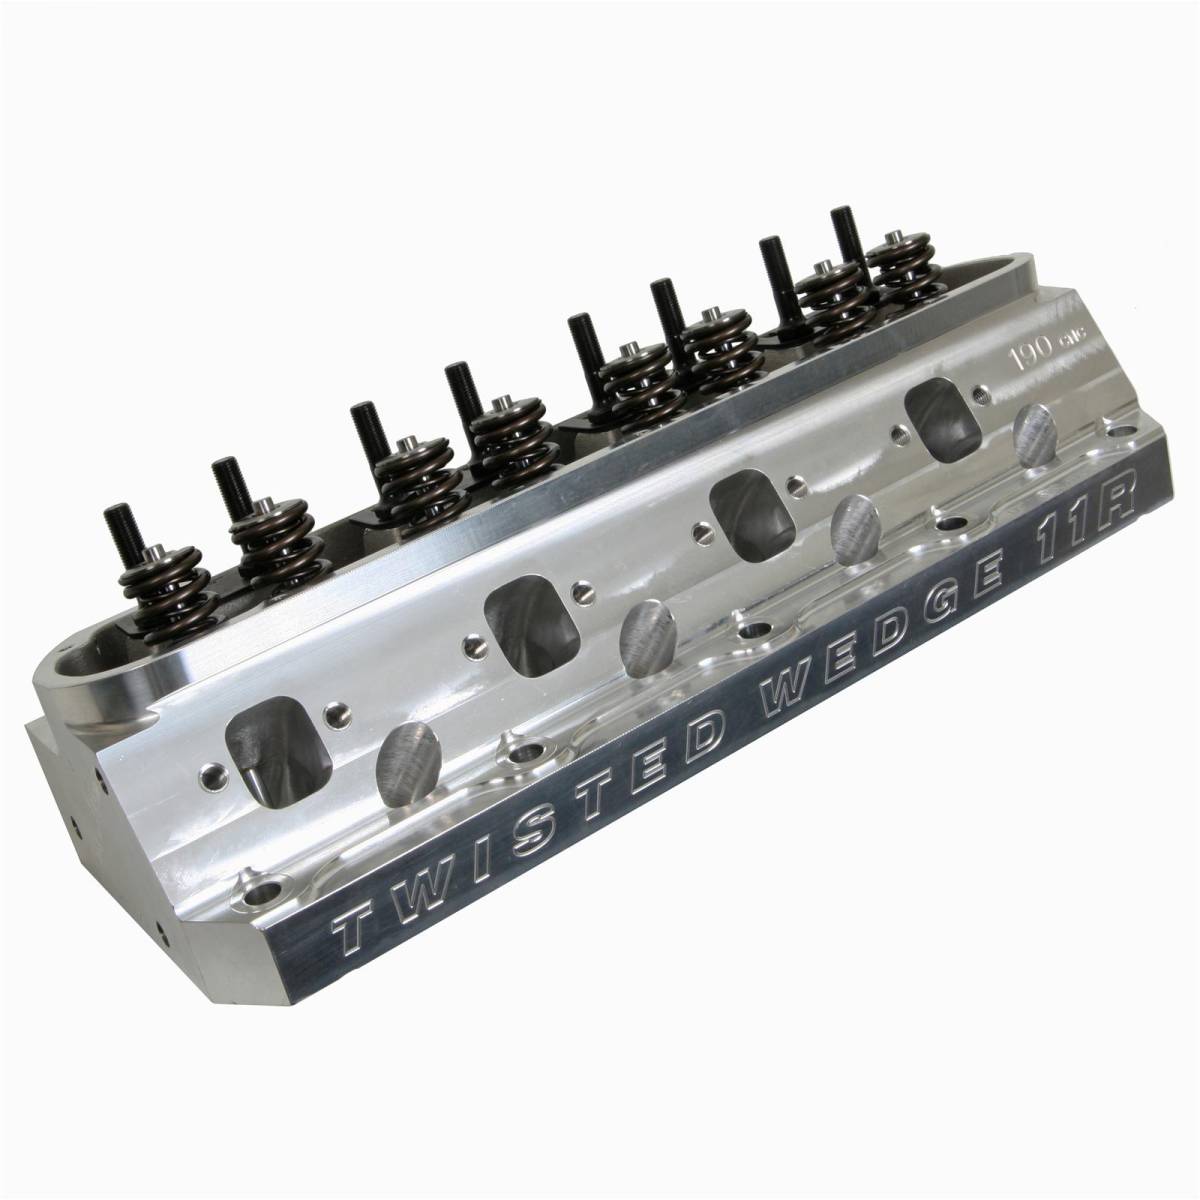 Trickflow - Trick Flow Twisted Wedge 11R Competition 205cc Cylinder Head, SBF, 66cc Chambers - Image 1